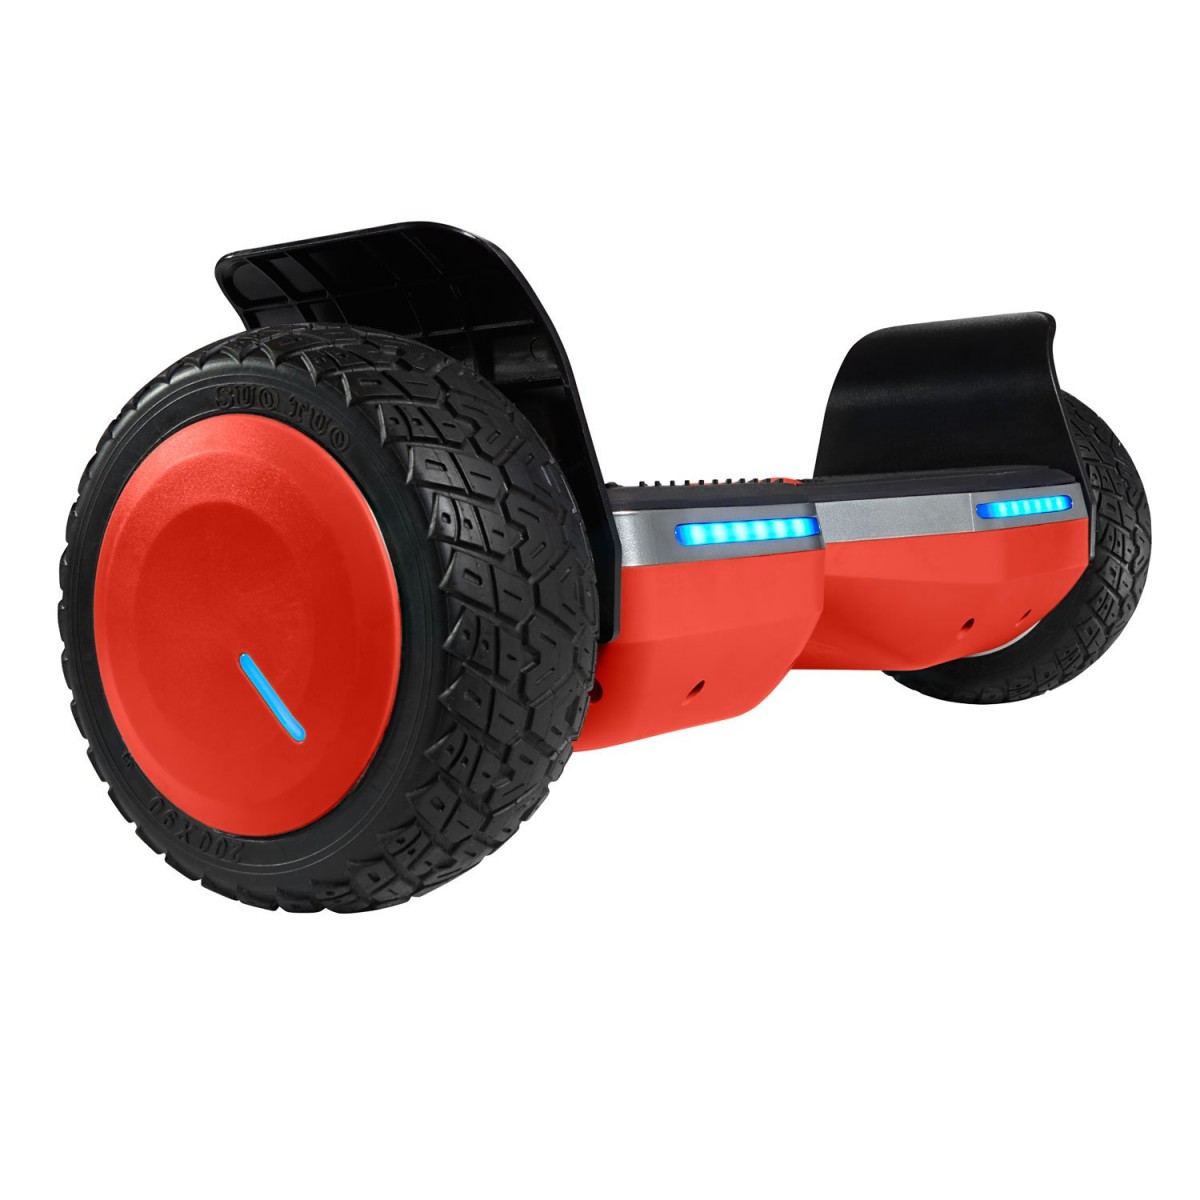 gotrax srx pro hoverboard review